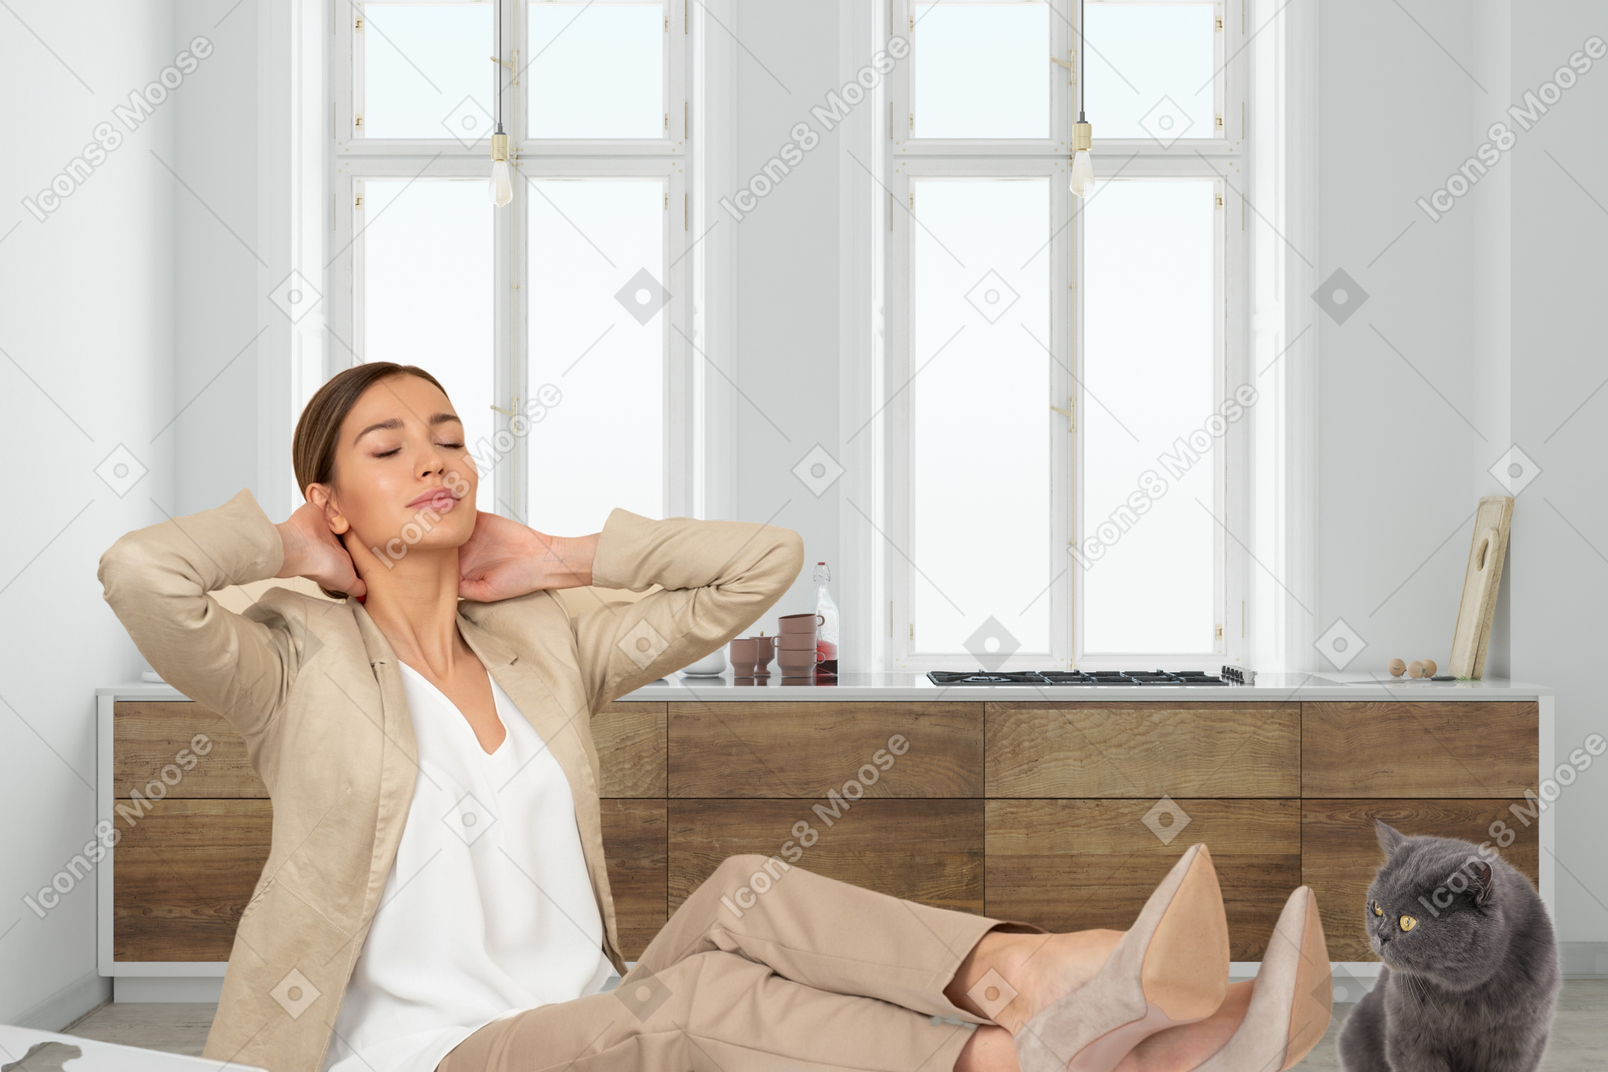 Man sitting on the couch and looking at camera